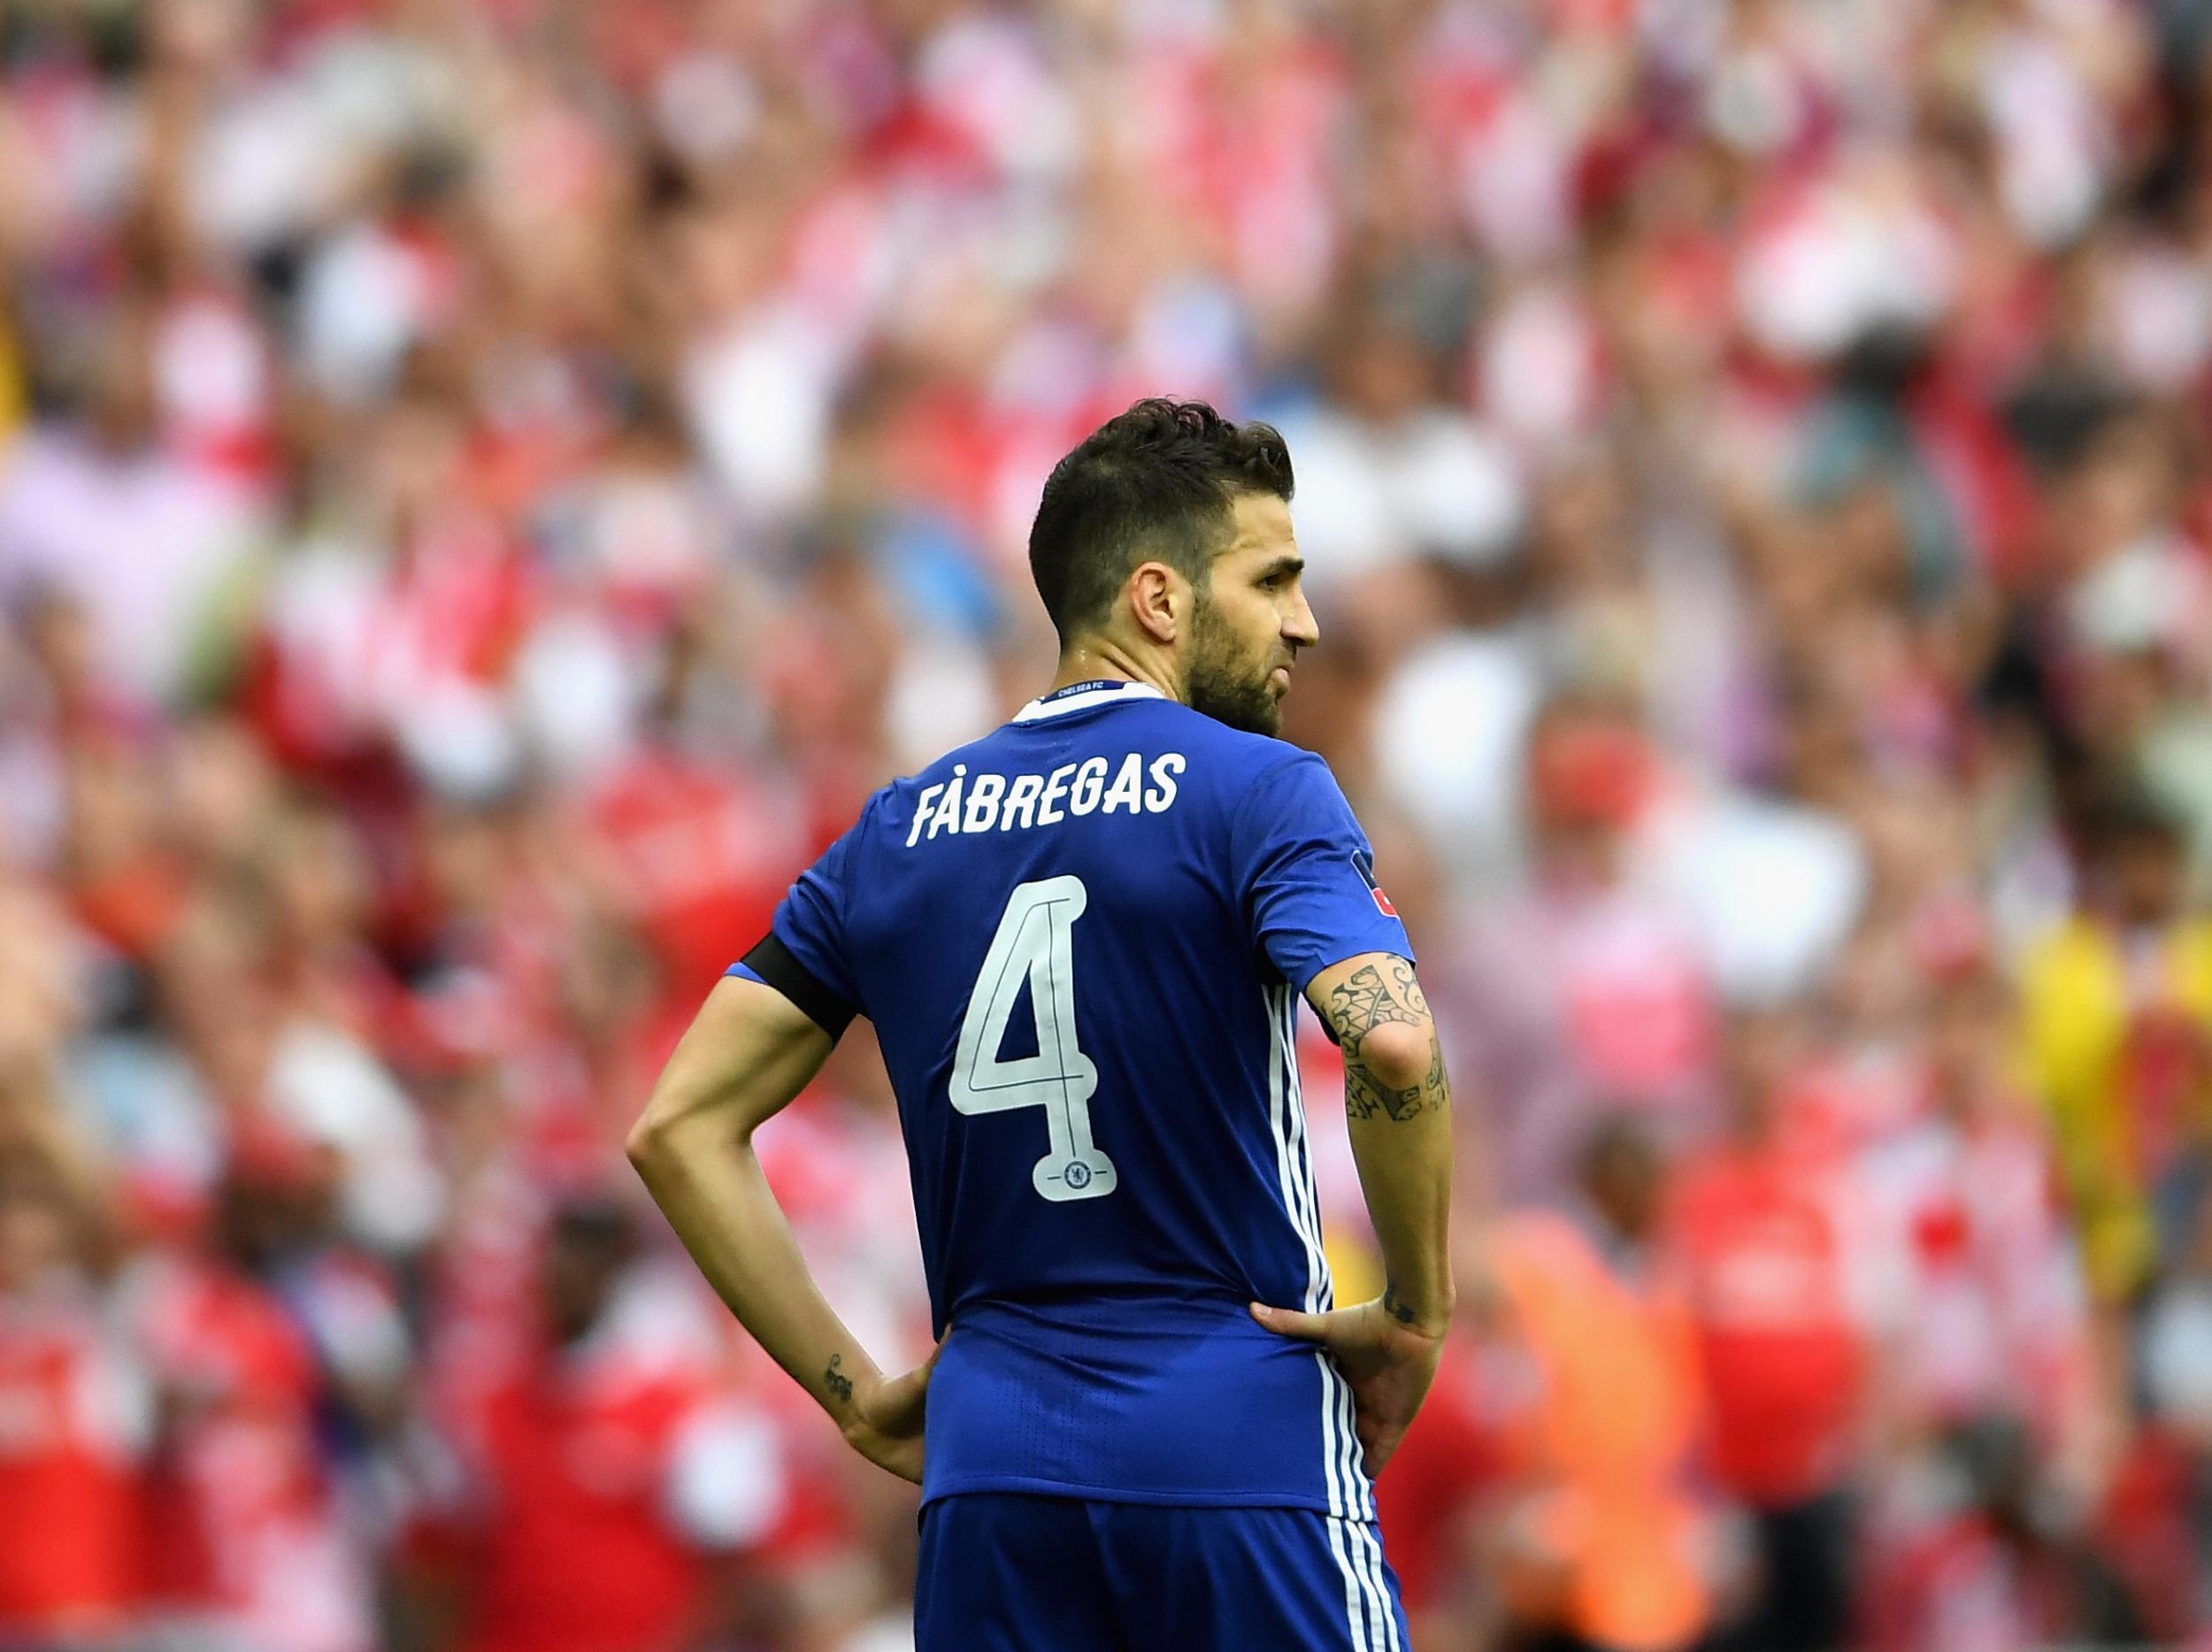 Fabregas was unable to change the game in the second-half